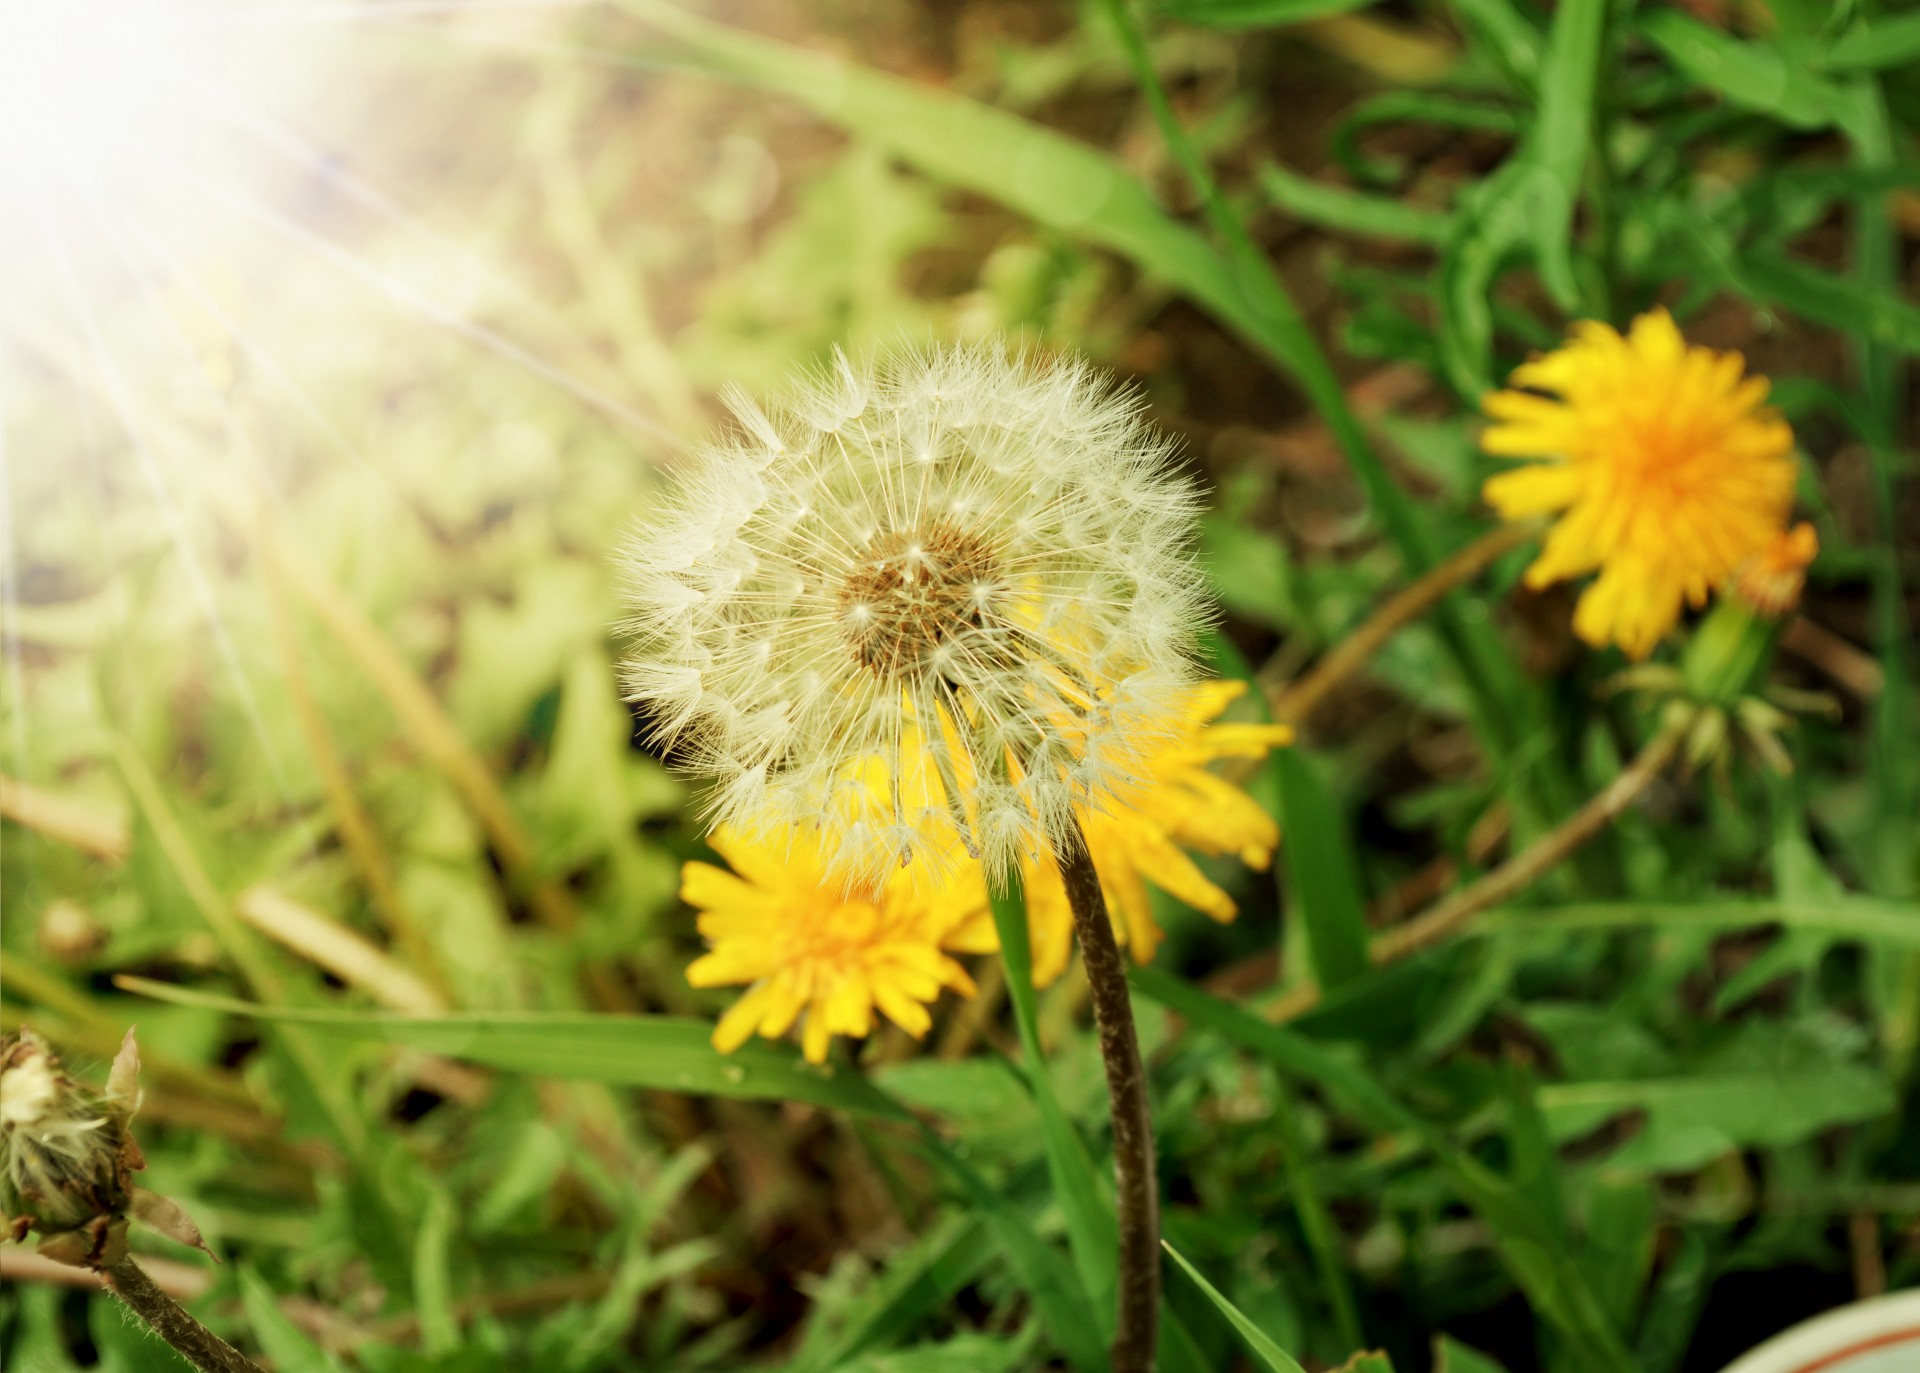 Tips To Kill Dandelions And Other Weeds Organically